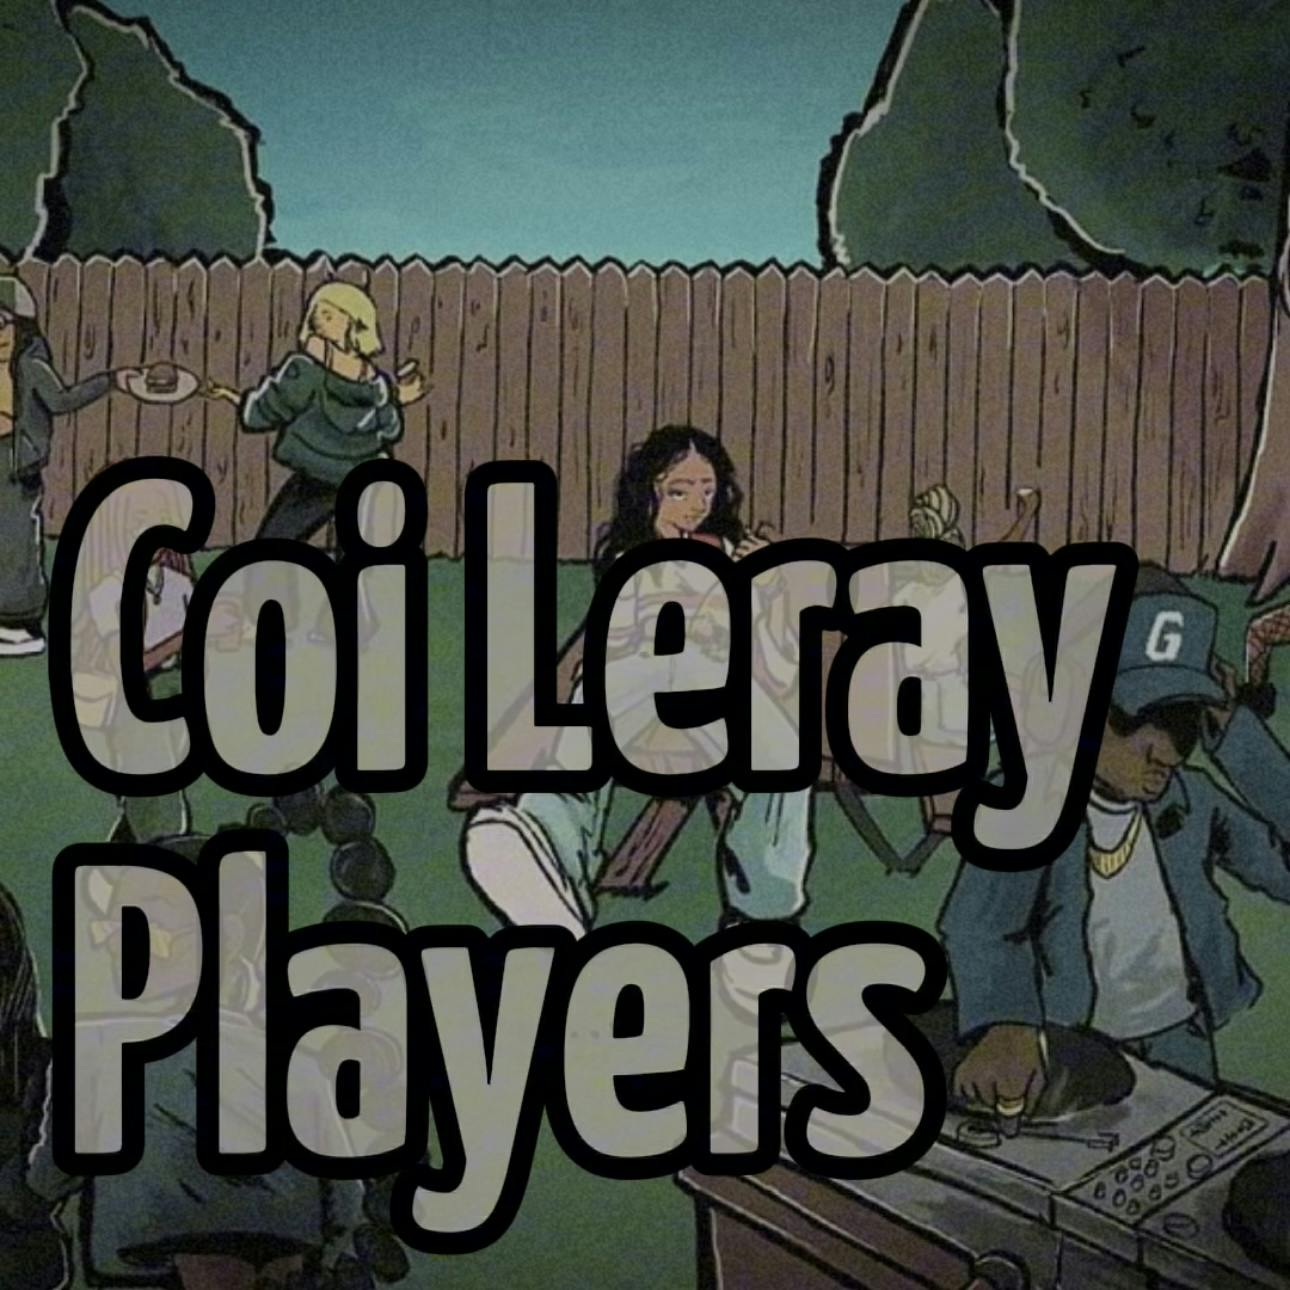 Coi Leray - Players (Sped Up)